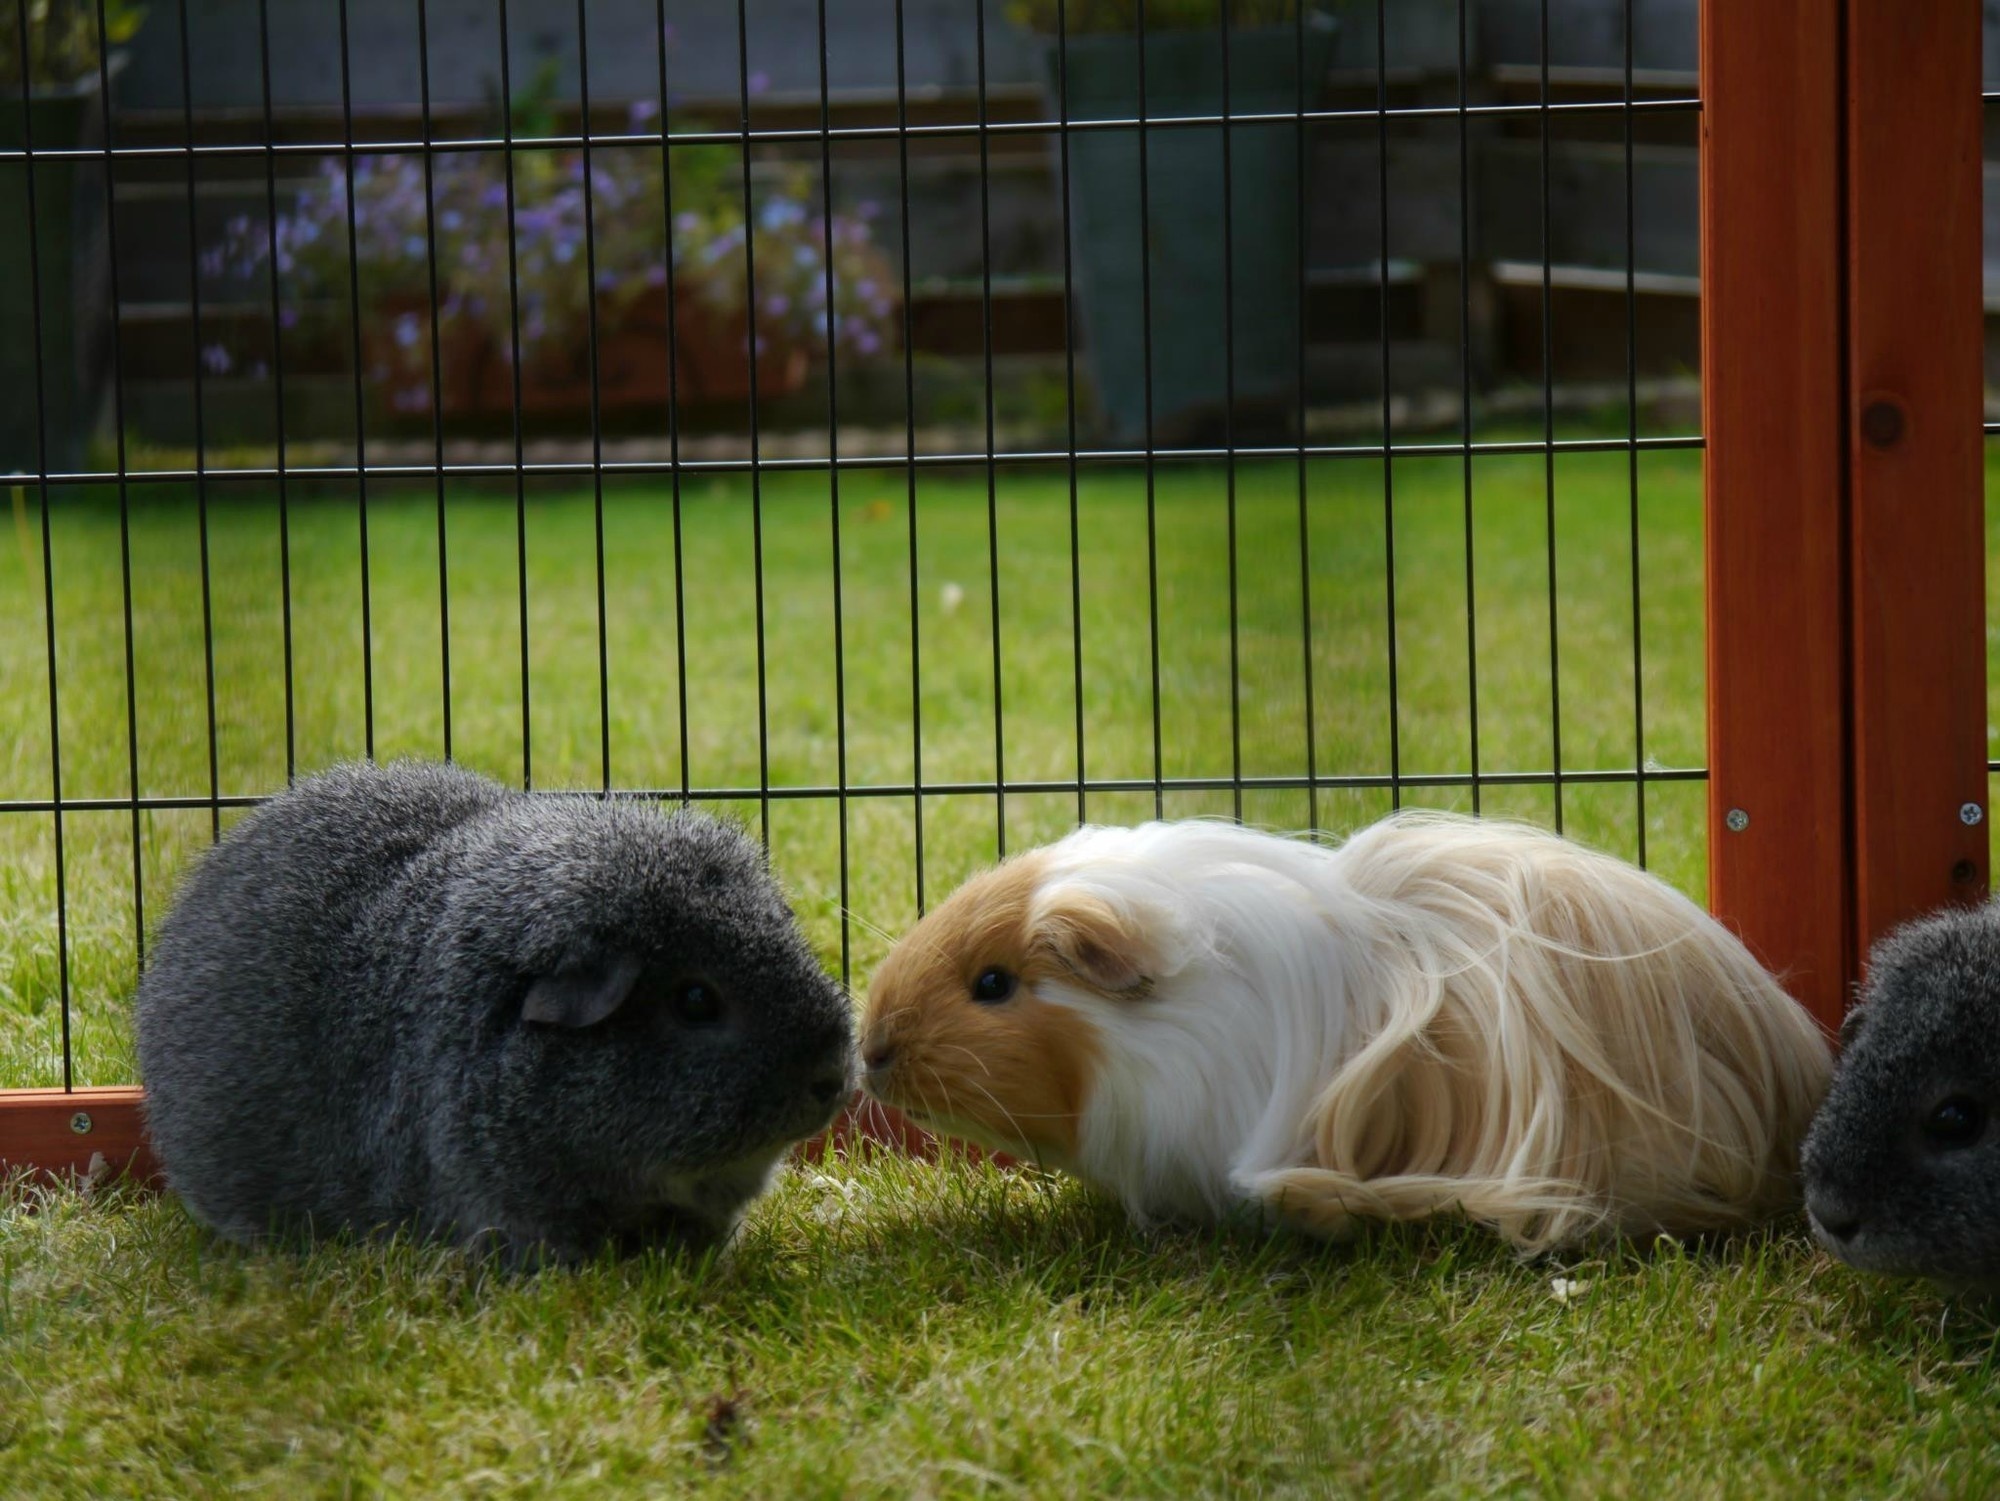 "Found this picture on my camera of two of my pigs kissing!"